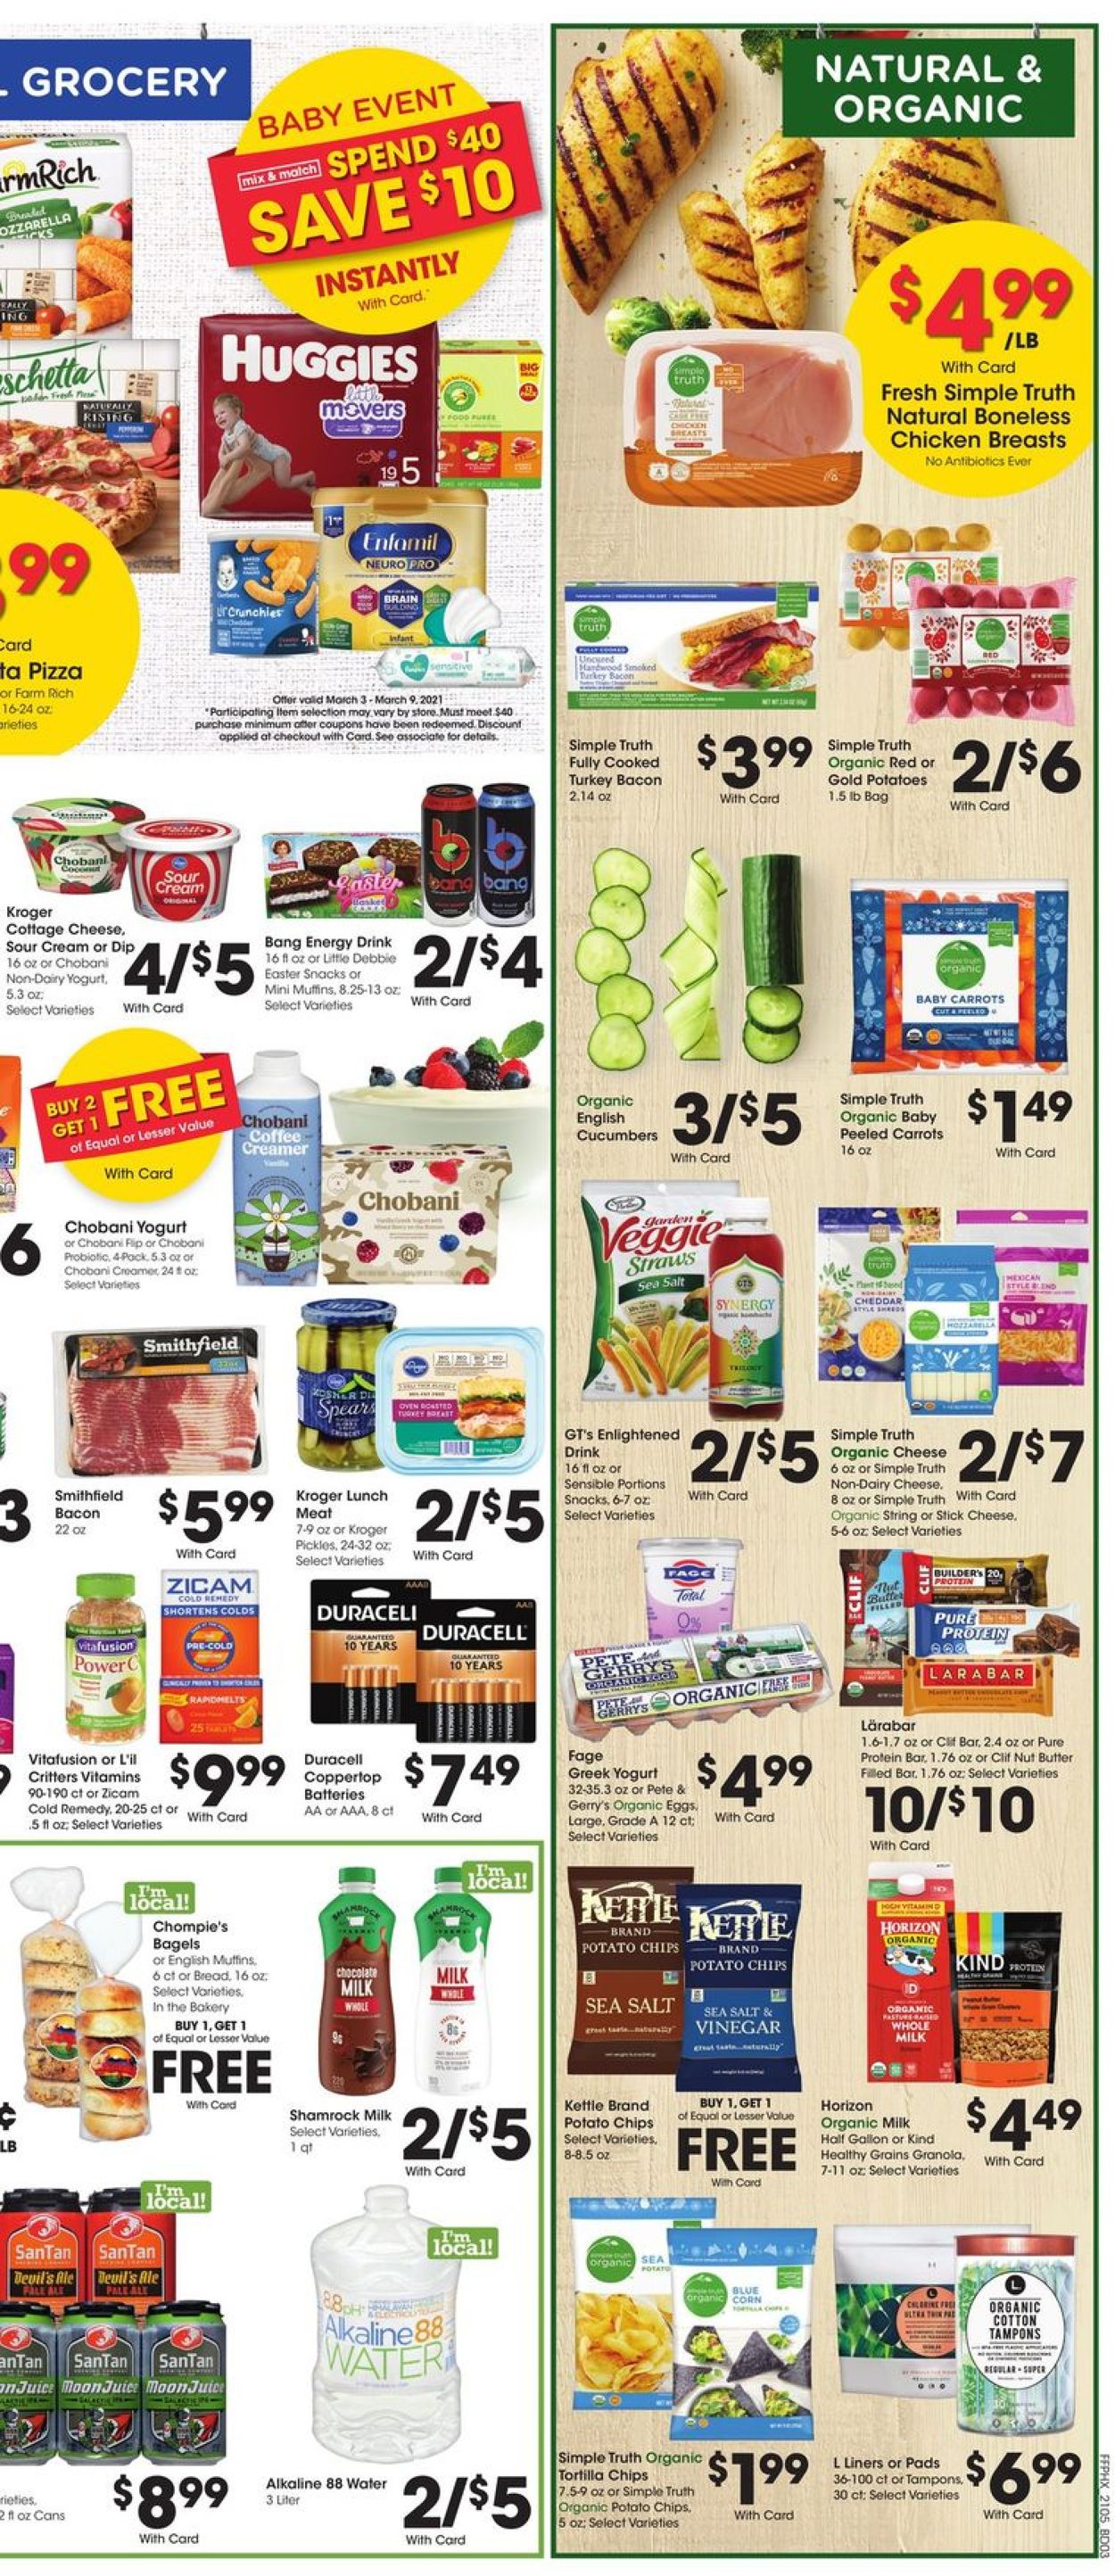 Fry’s Current weekly ad 03/03 - 03/09/2021 [5] - frequent-ads.com